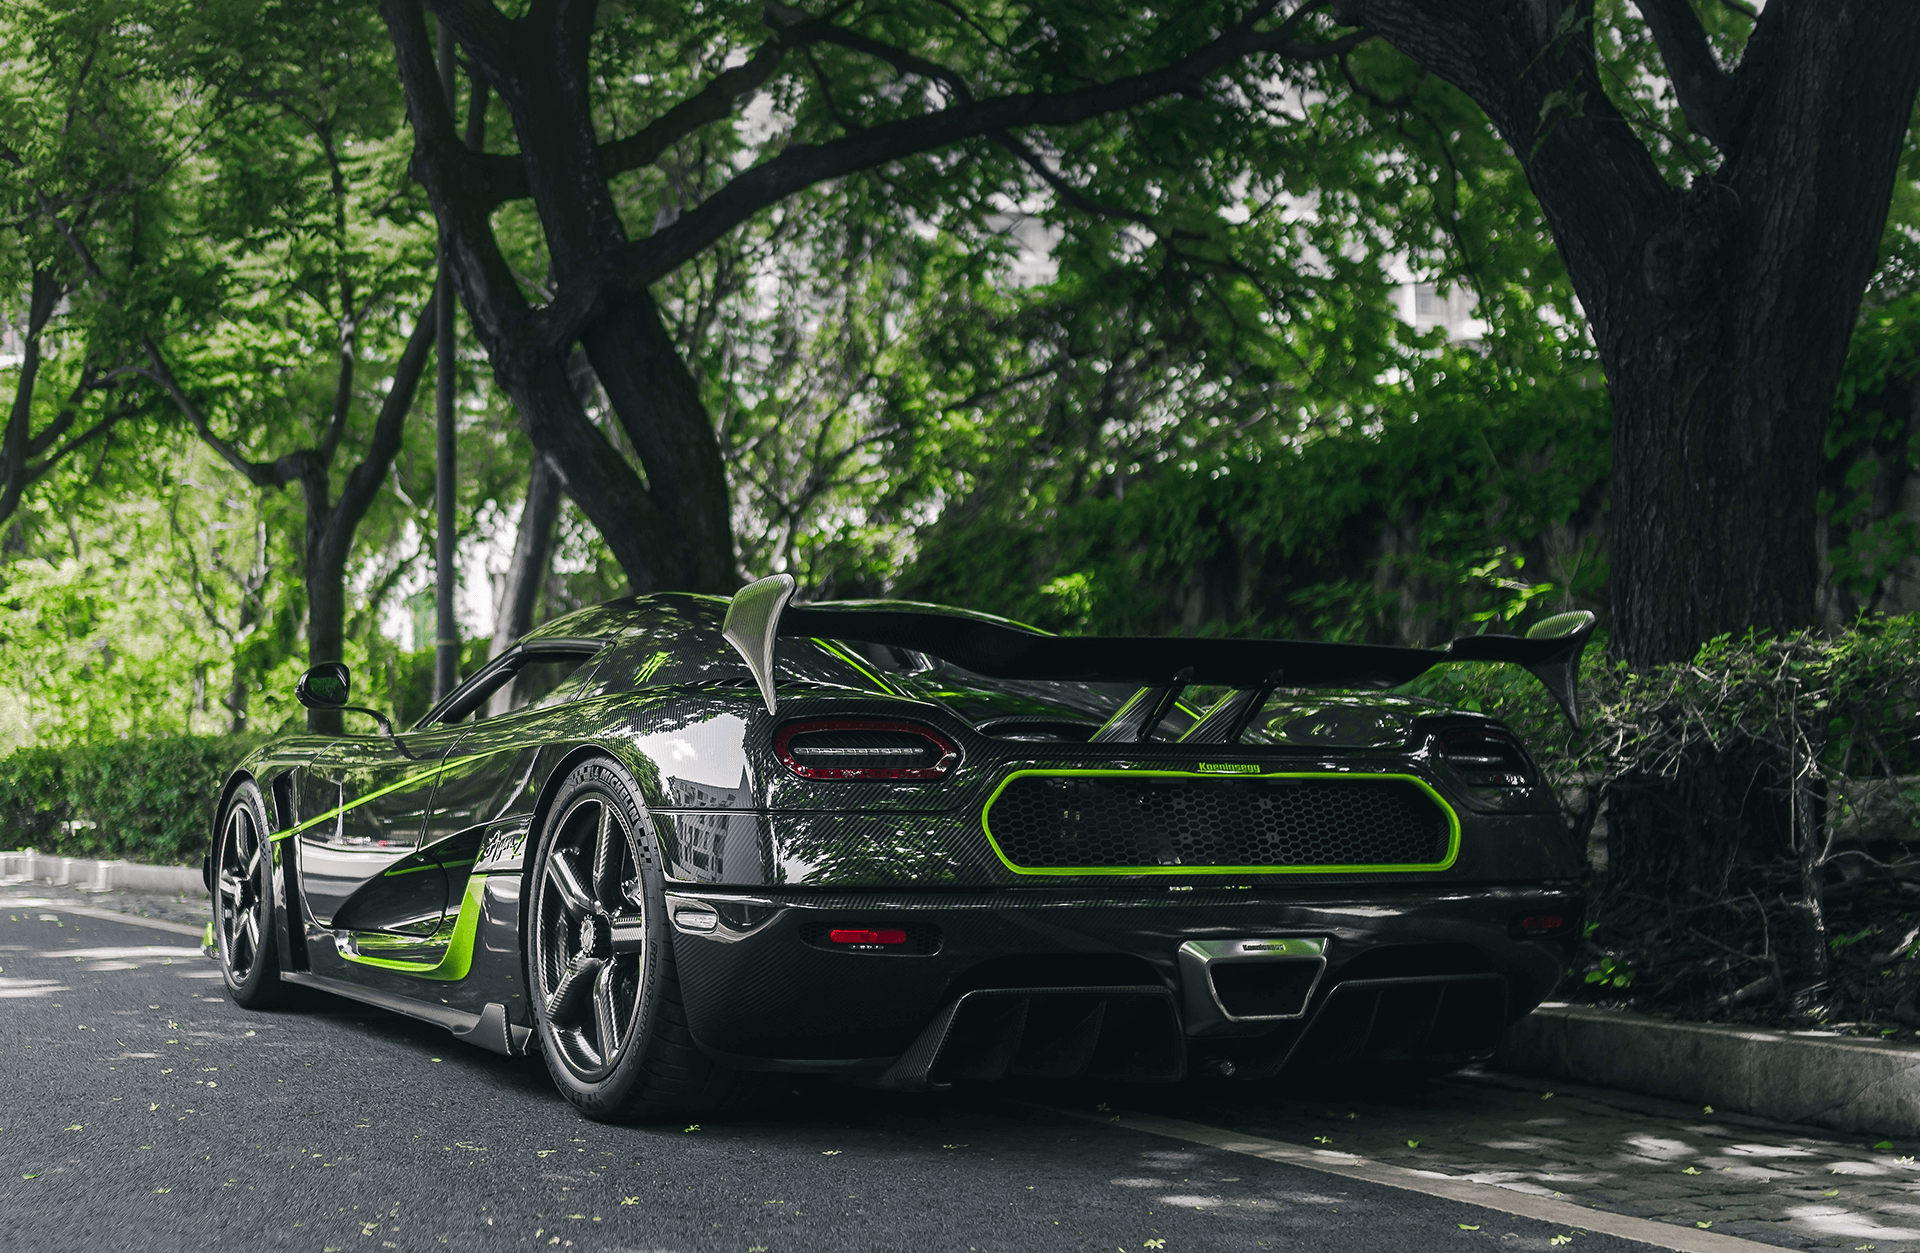 A black Koenigsegg Agera R+ hypercar is parked on road